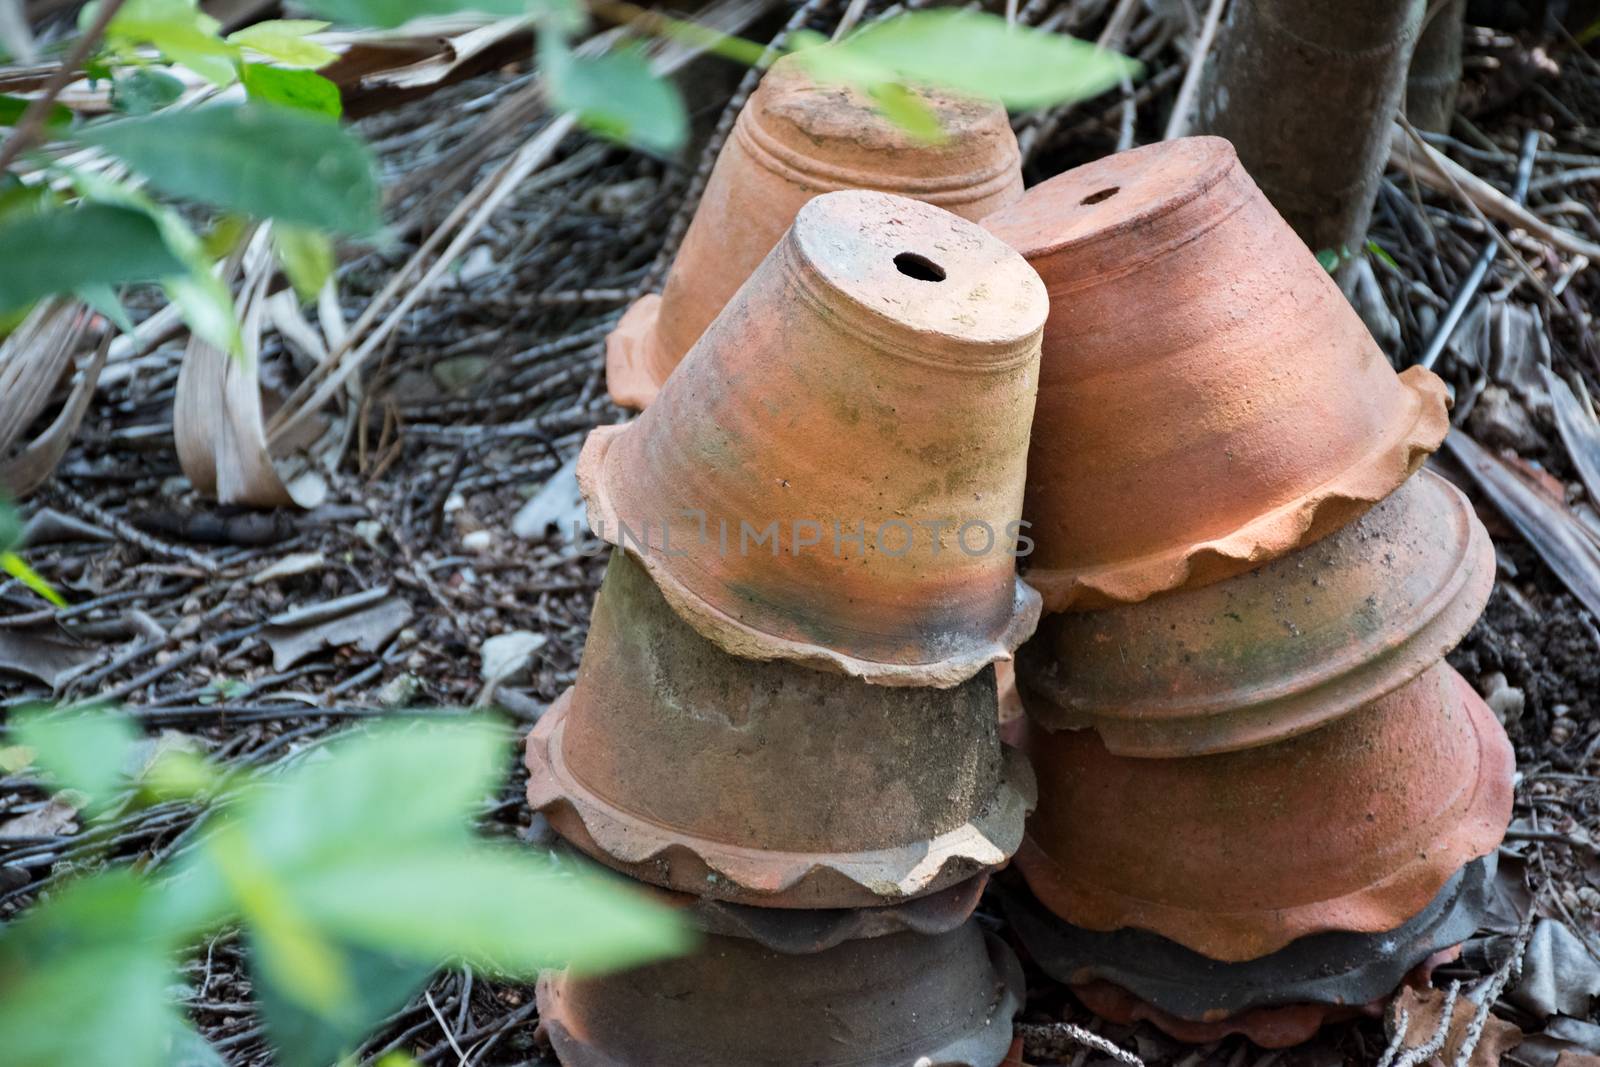 A group of terracotta pots that are stacked in the garden